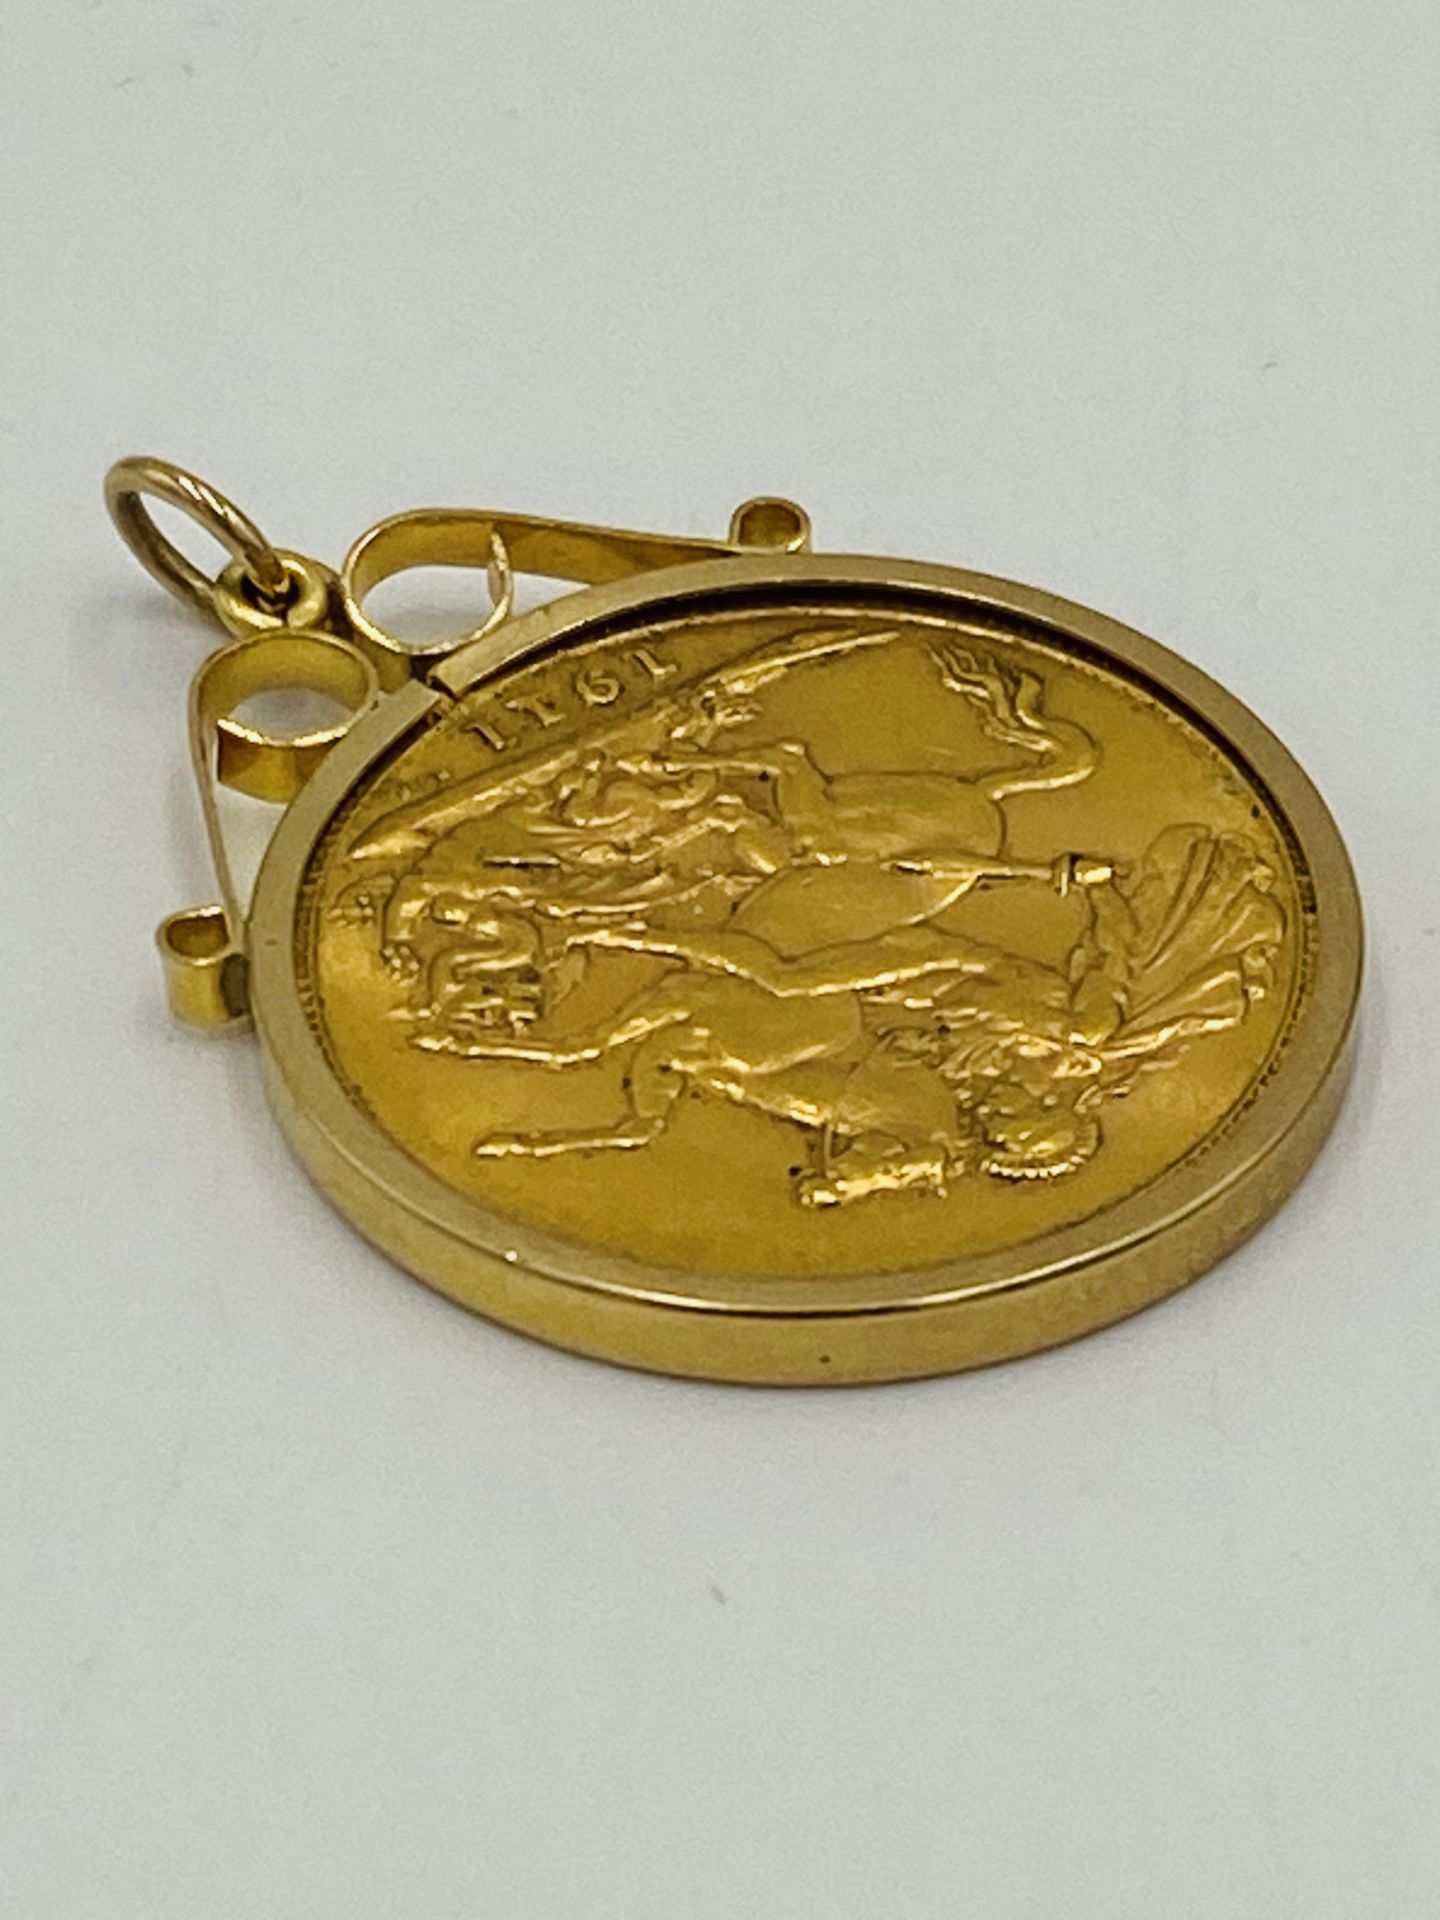 George V gold sovereign, 1911 in 9ct gold mount - Image 3 of 4